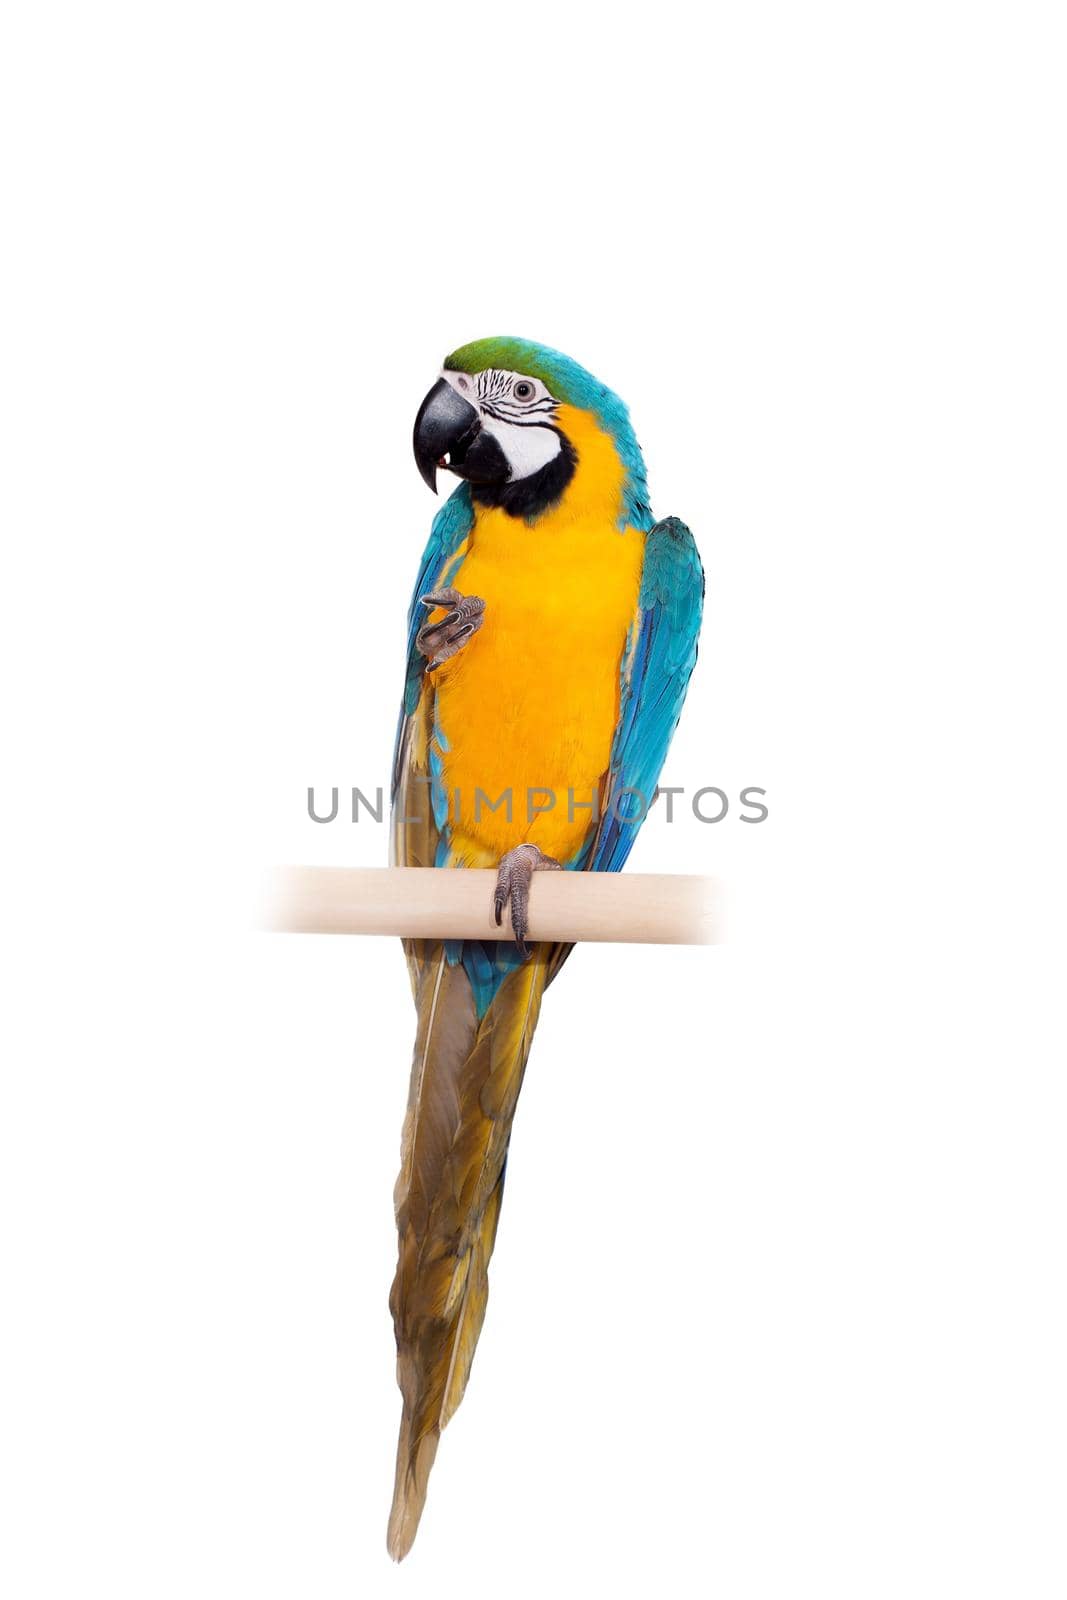 Blue and Yellow Macaw - Ara Ararauna, perched on pole on the white background